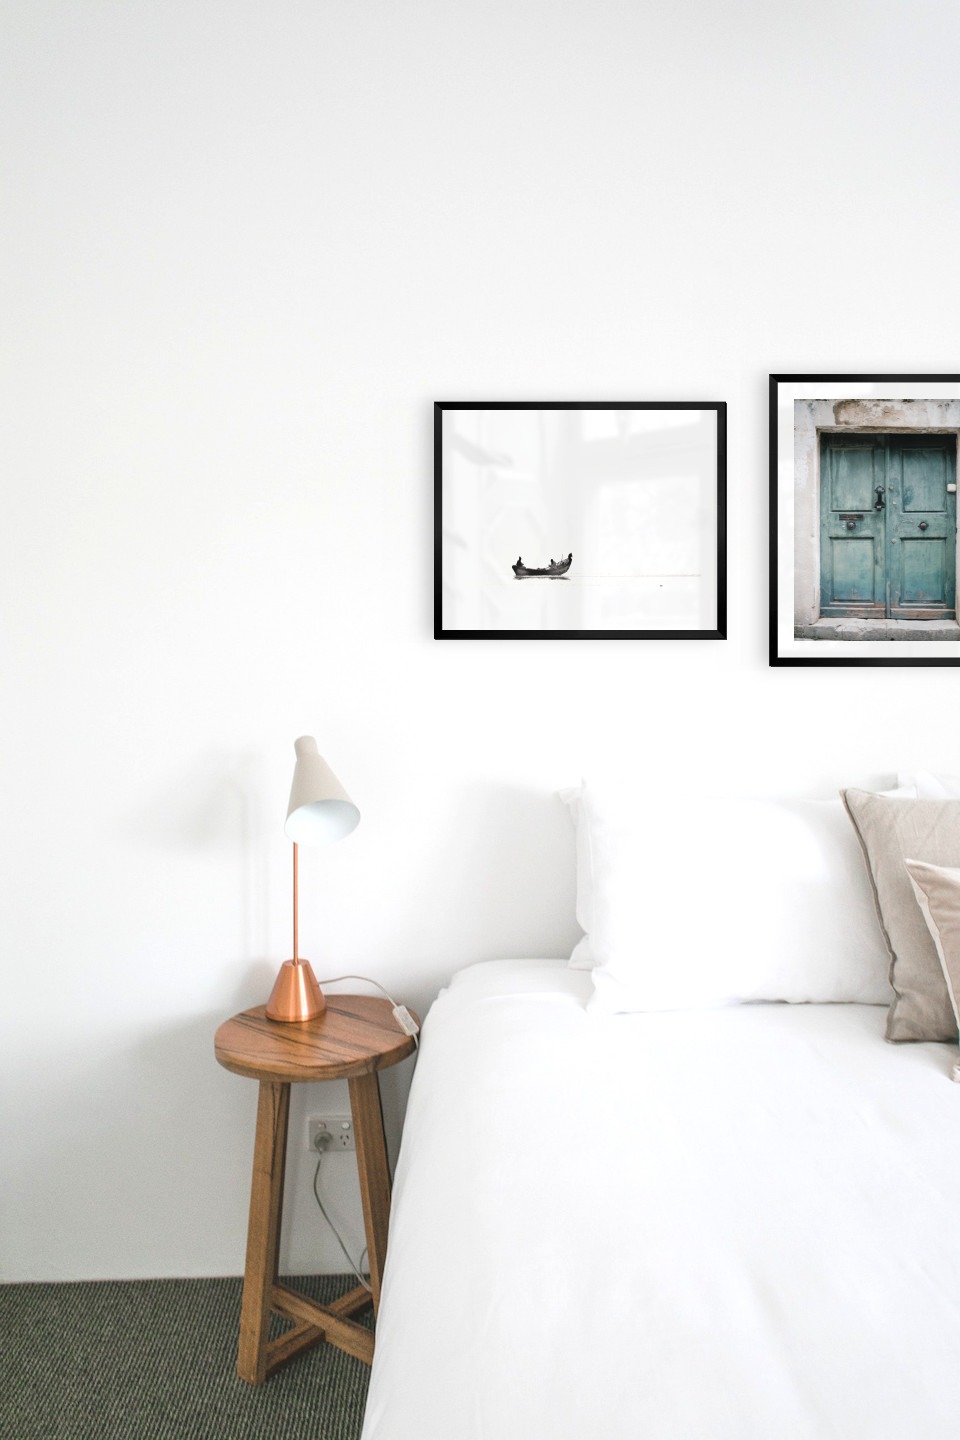 Gallery wall with picture frames in black in sizes 40x50 with prints "People in boat" and "Door"